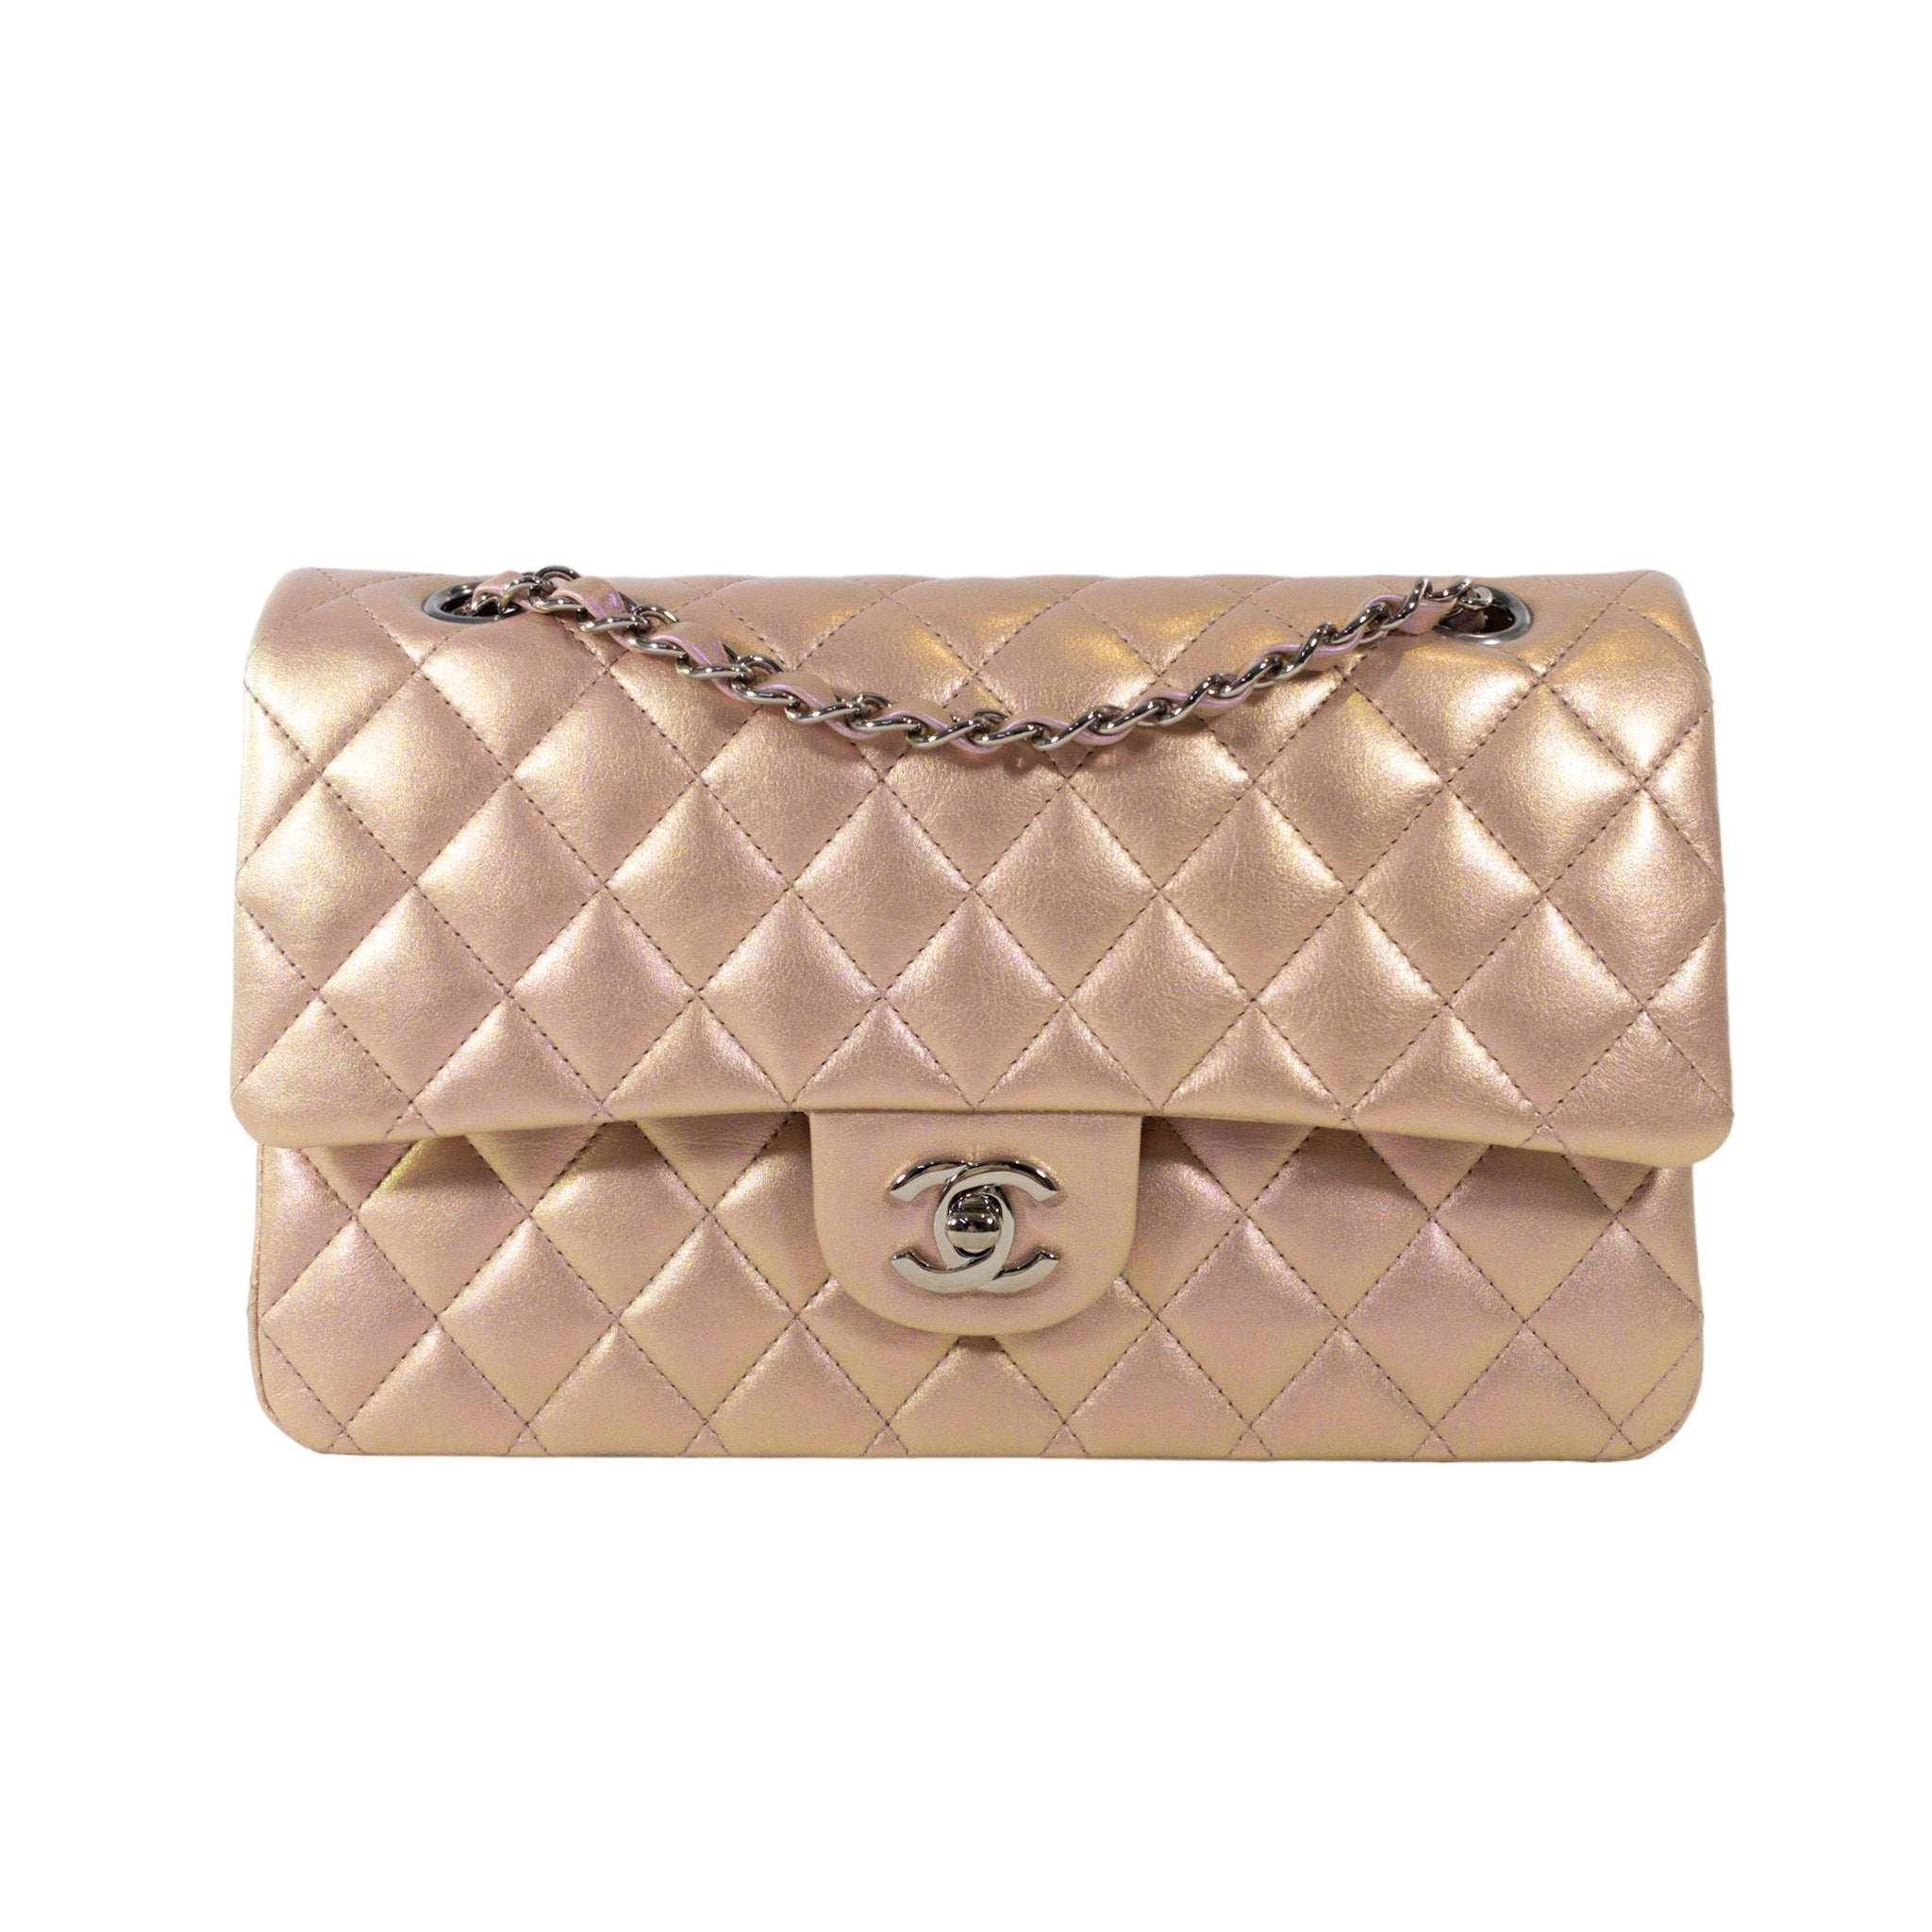 Chanel Fuchsia Caviar Leather WOC with Light Gold Hardware at the